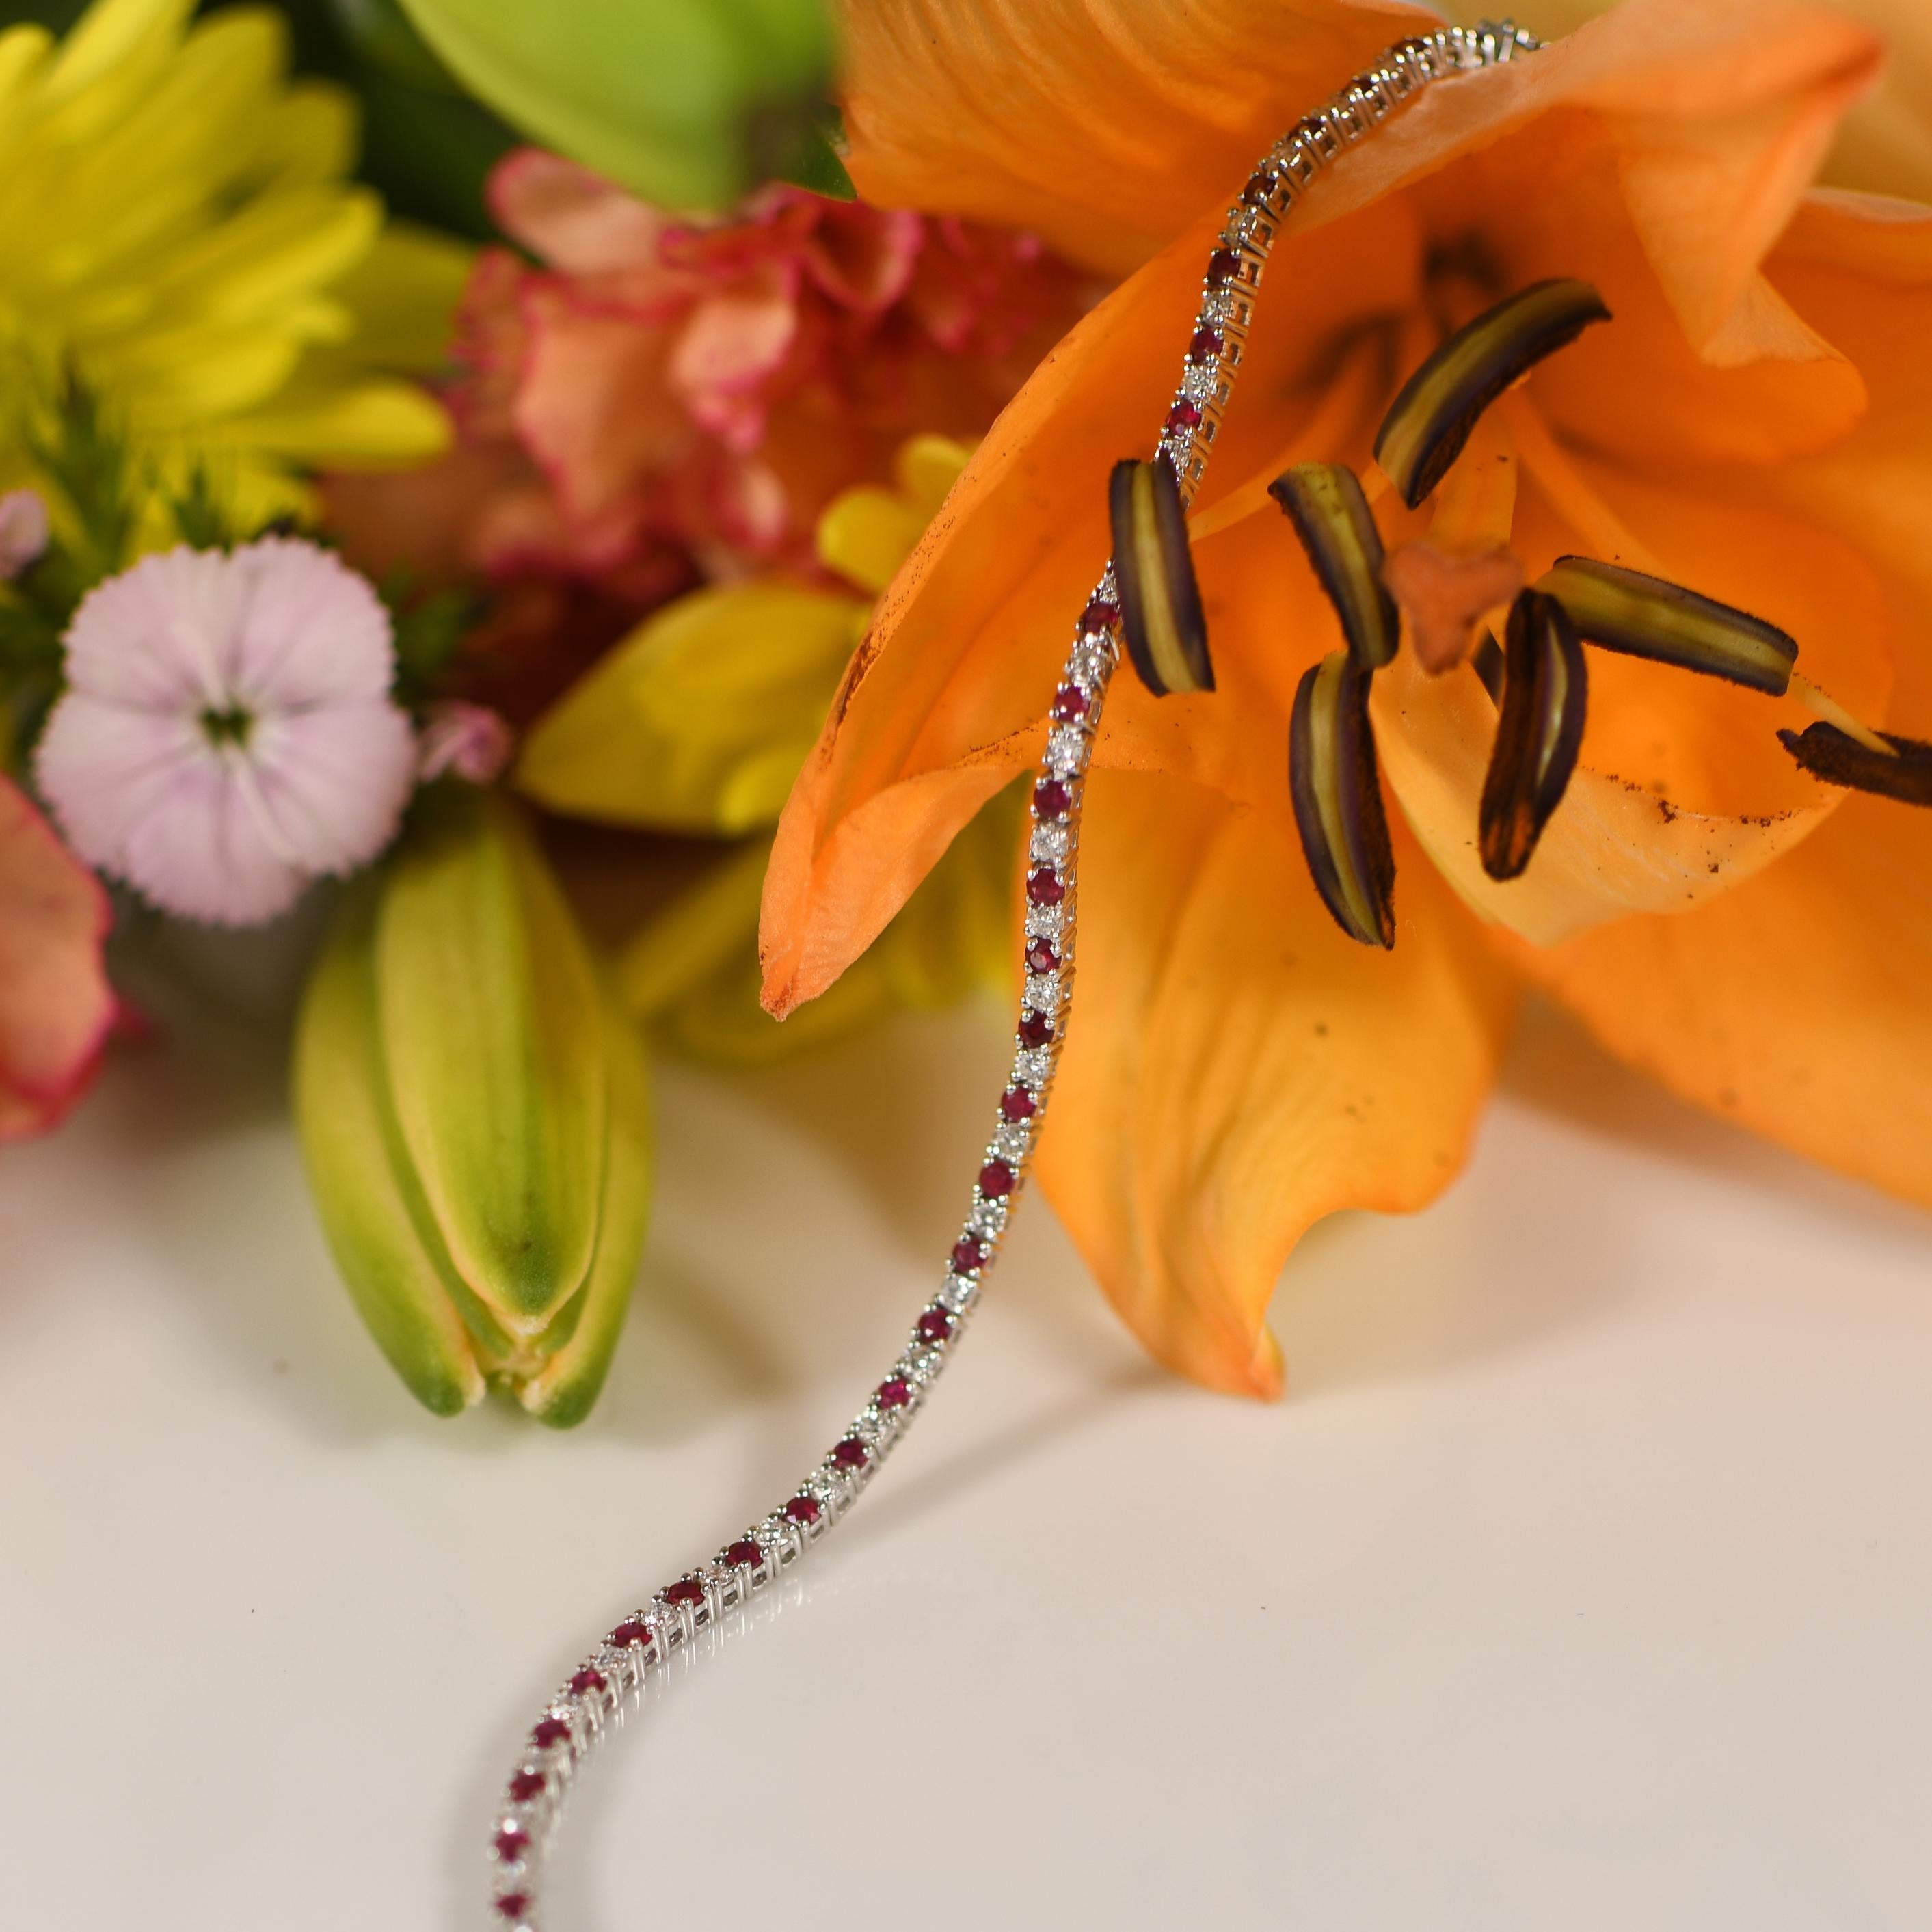 Radiating with timeless allure, this stunning bracelet boasts a total weight of 5.34 carats, adorned with radiant rubies and dazzling diamonds. Crafted from gleaming 14K white gold, its intricate design showcases the fiery red hue of the rubies